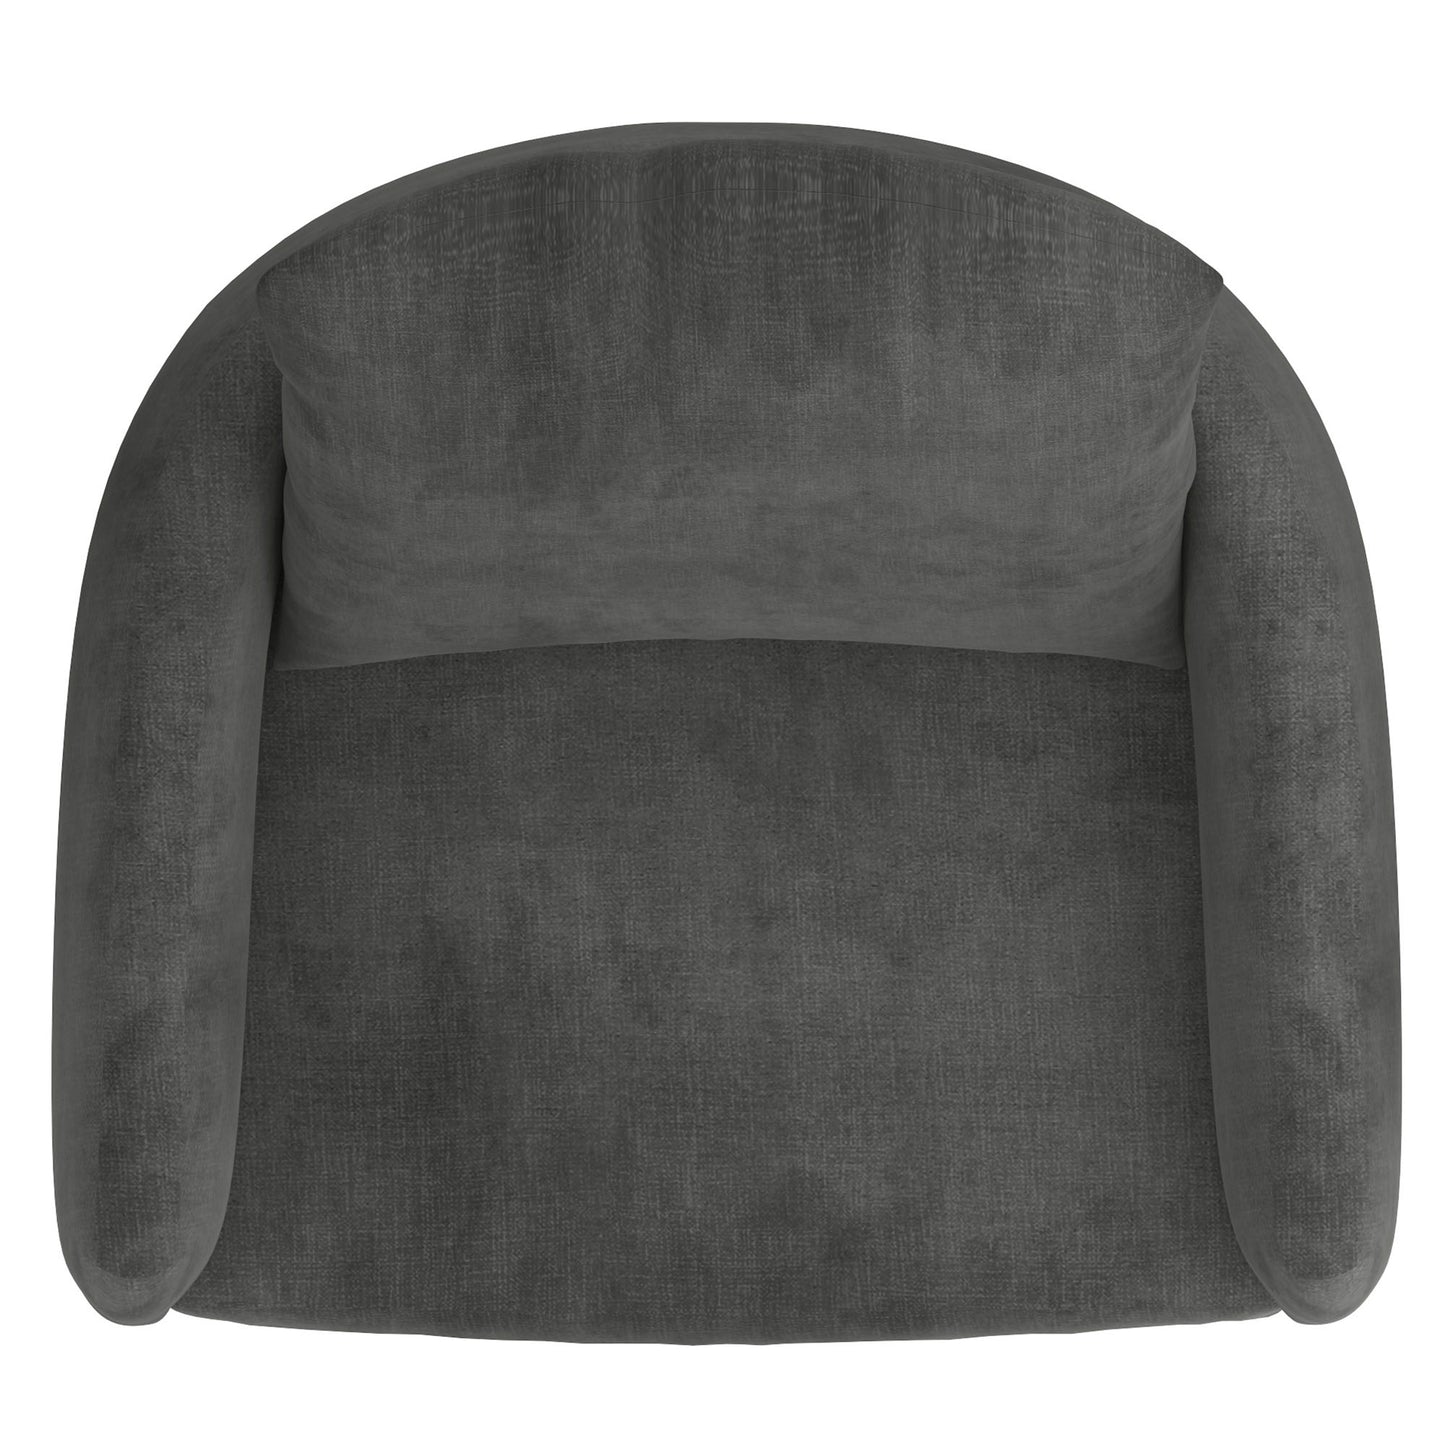 (PETRIE CHARCOAL) - FABRIC - ACCENT CHAIR